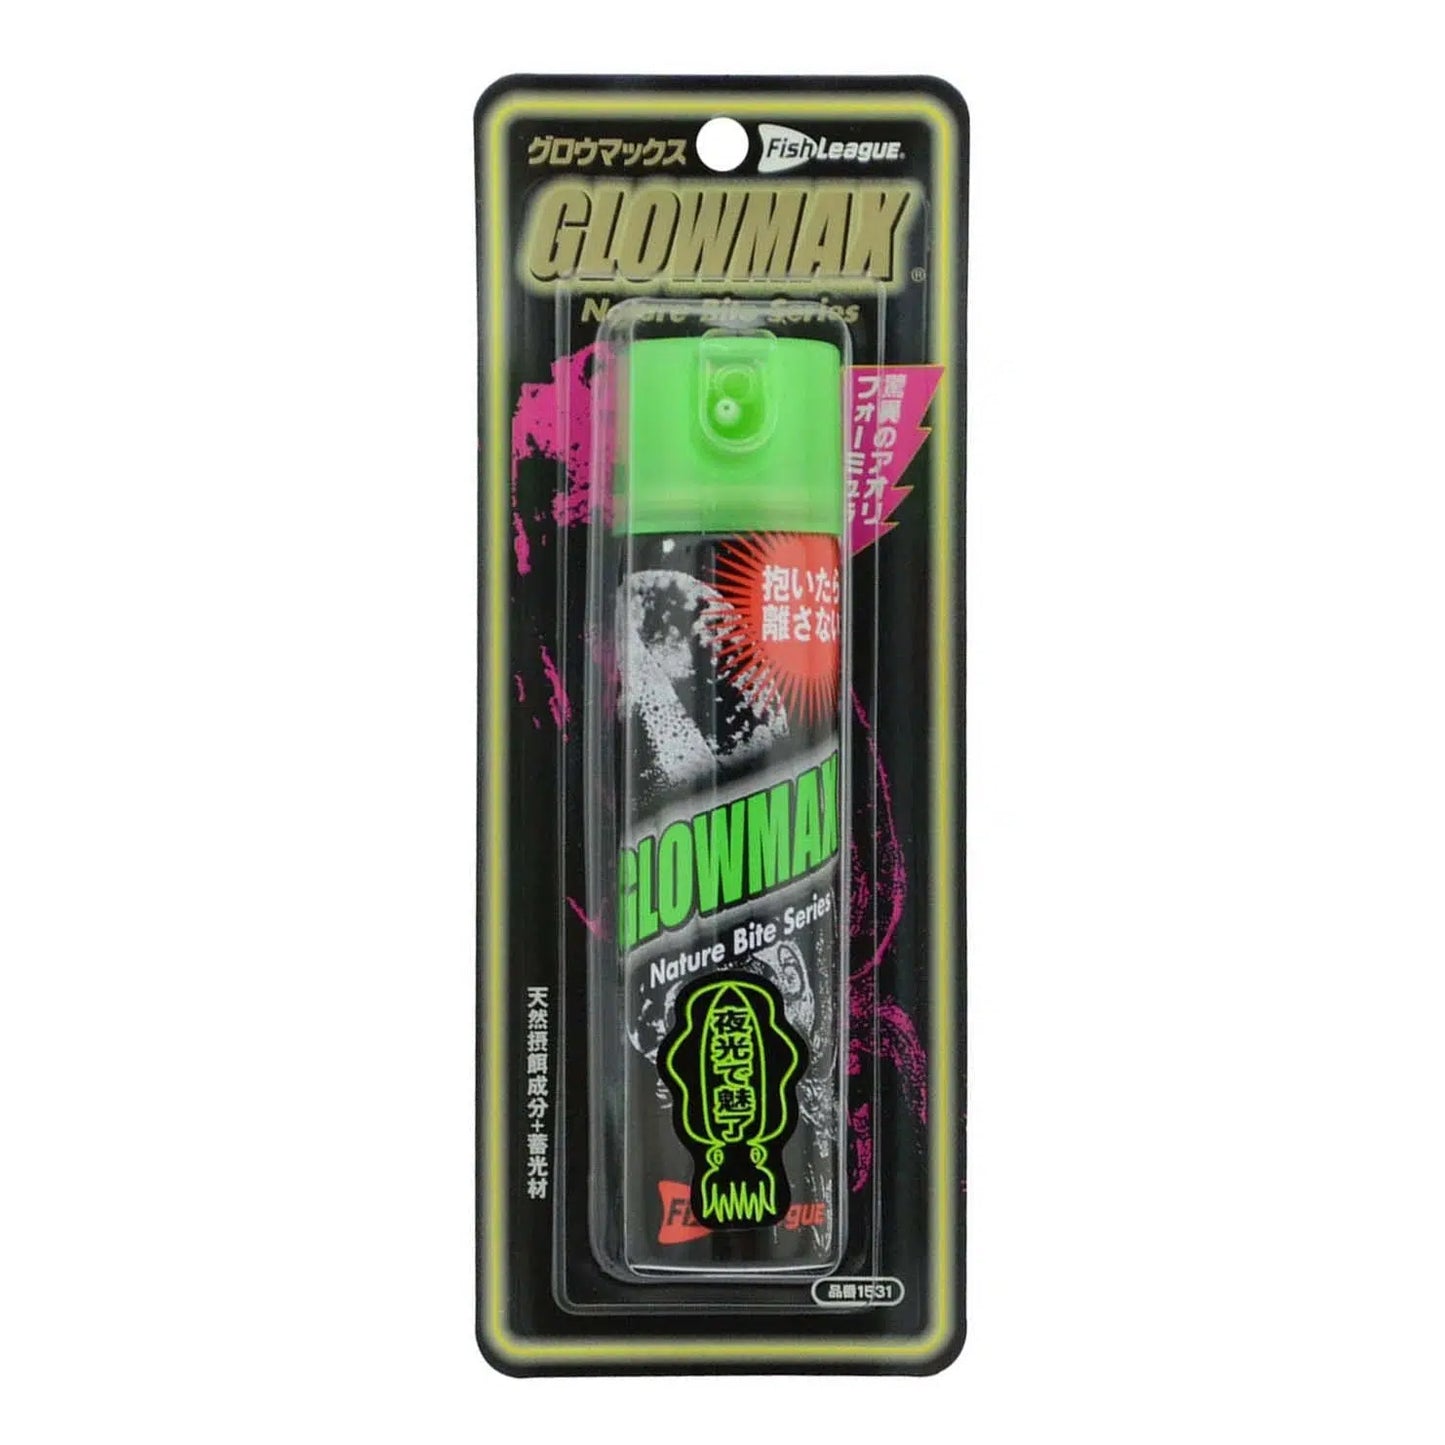 Glowmax Scent 80ml Lure Spray-Fish Attractants & Scents-Fish League-Fishing Station